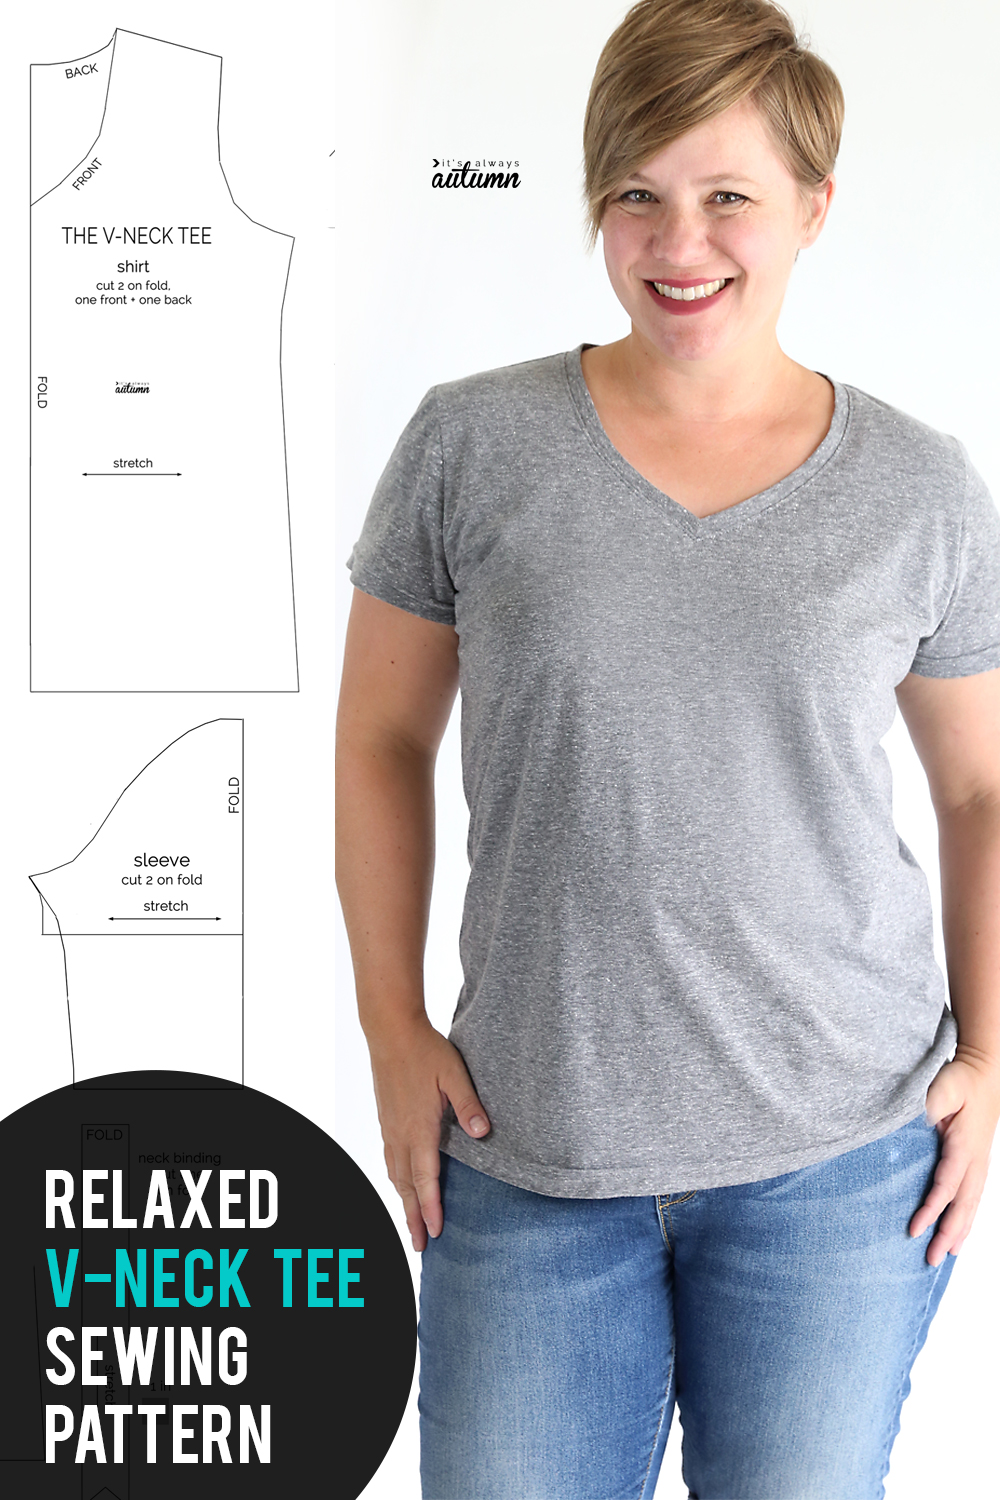 How to Make a T-Shirt Bigger (the easy way!)